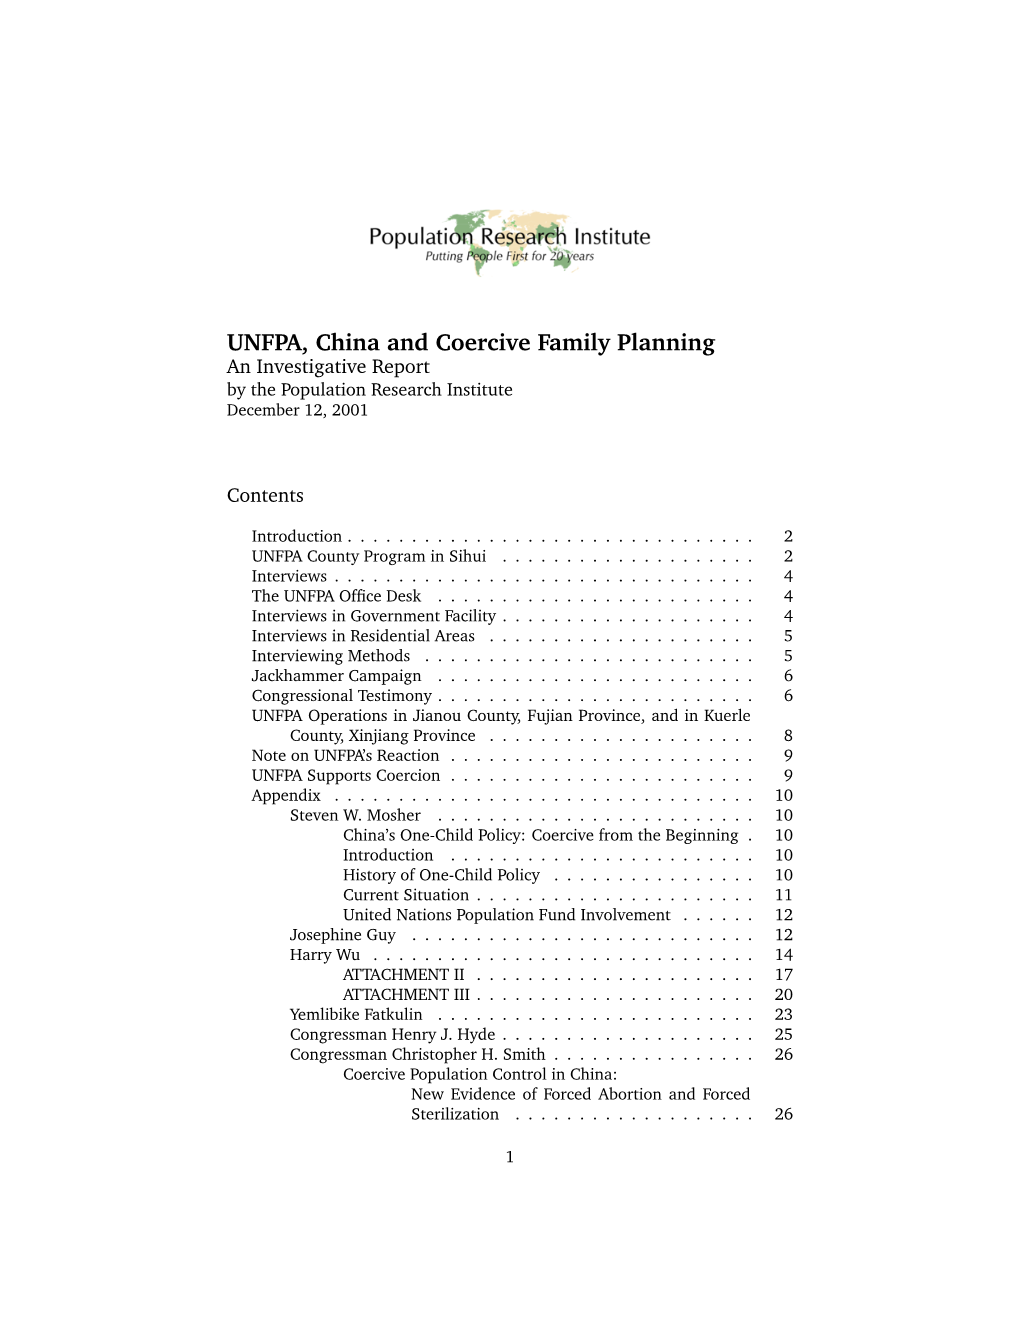 UNFPA, China and Coercive Family Planning an Investigative Report by the Population Research Institute December 12, 2001